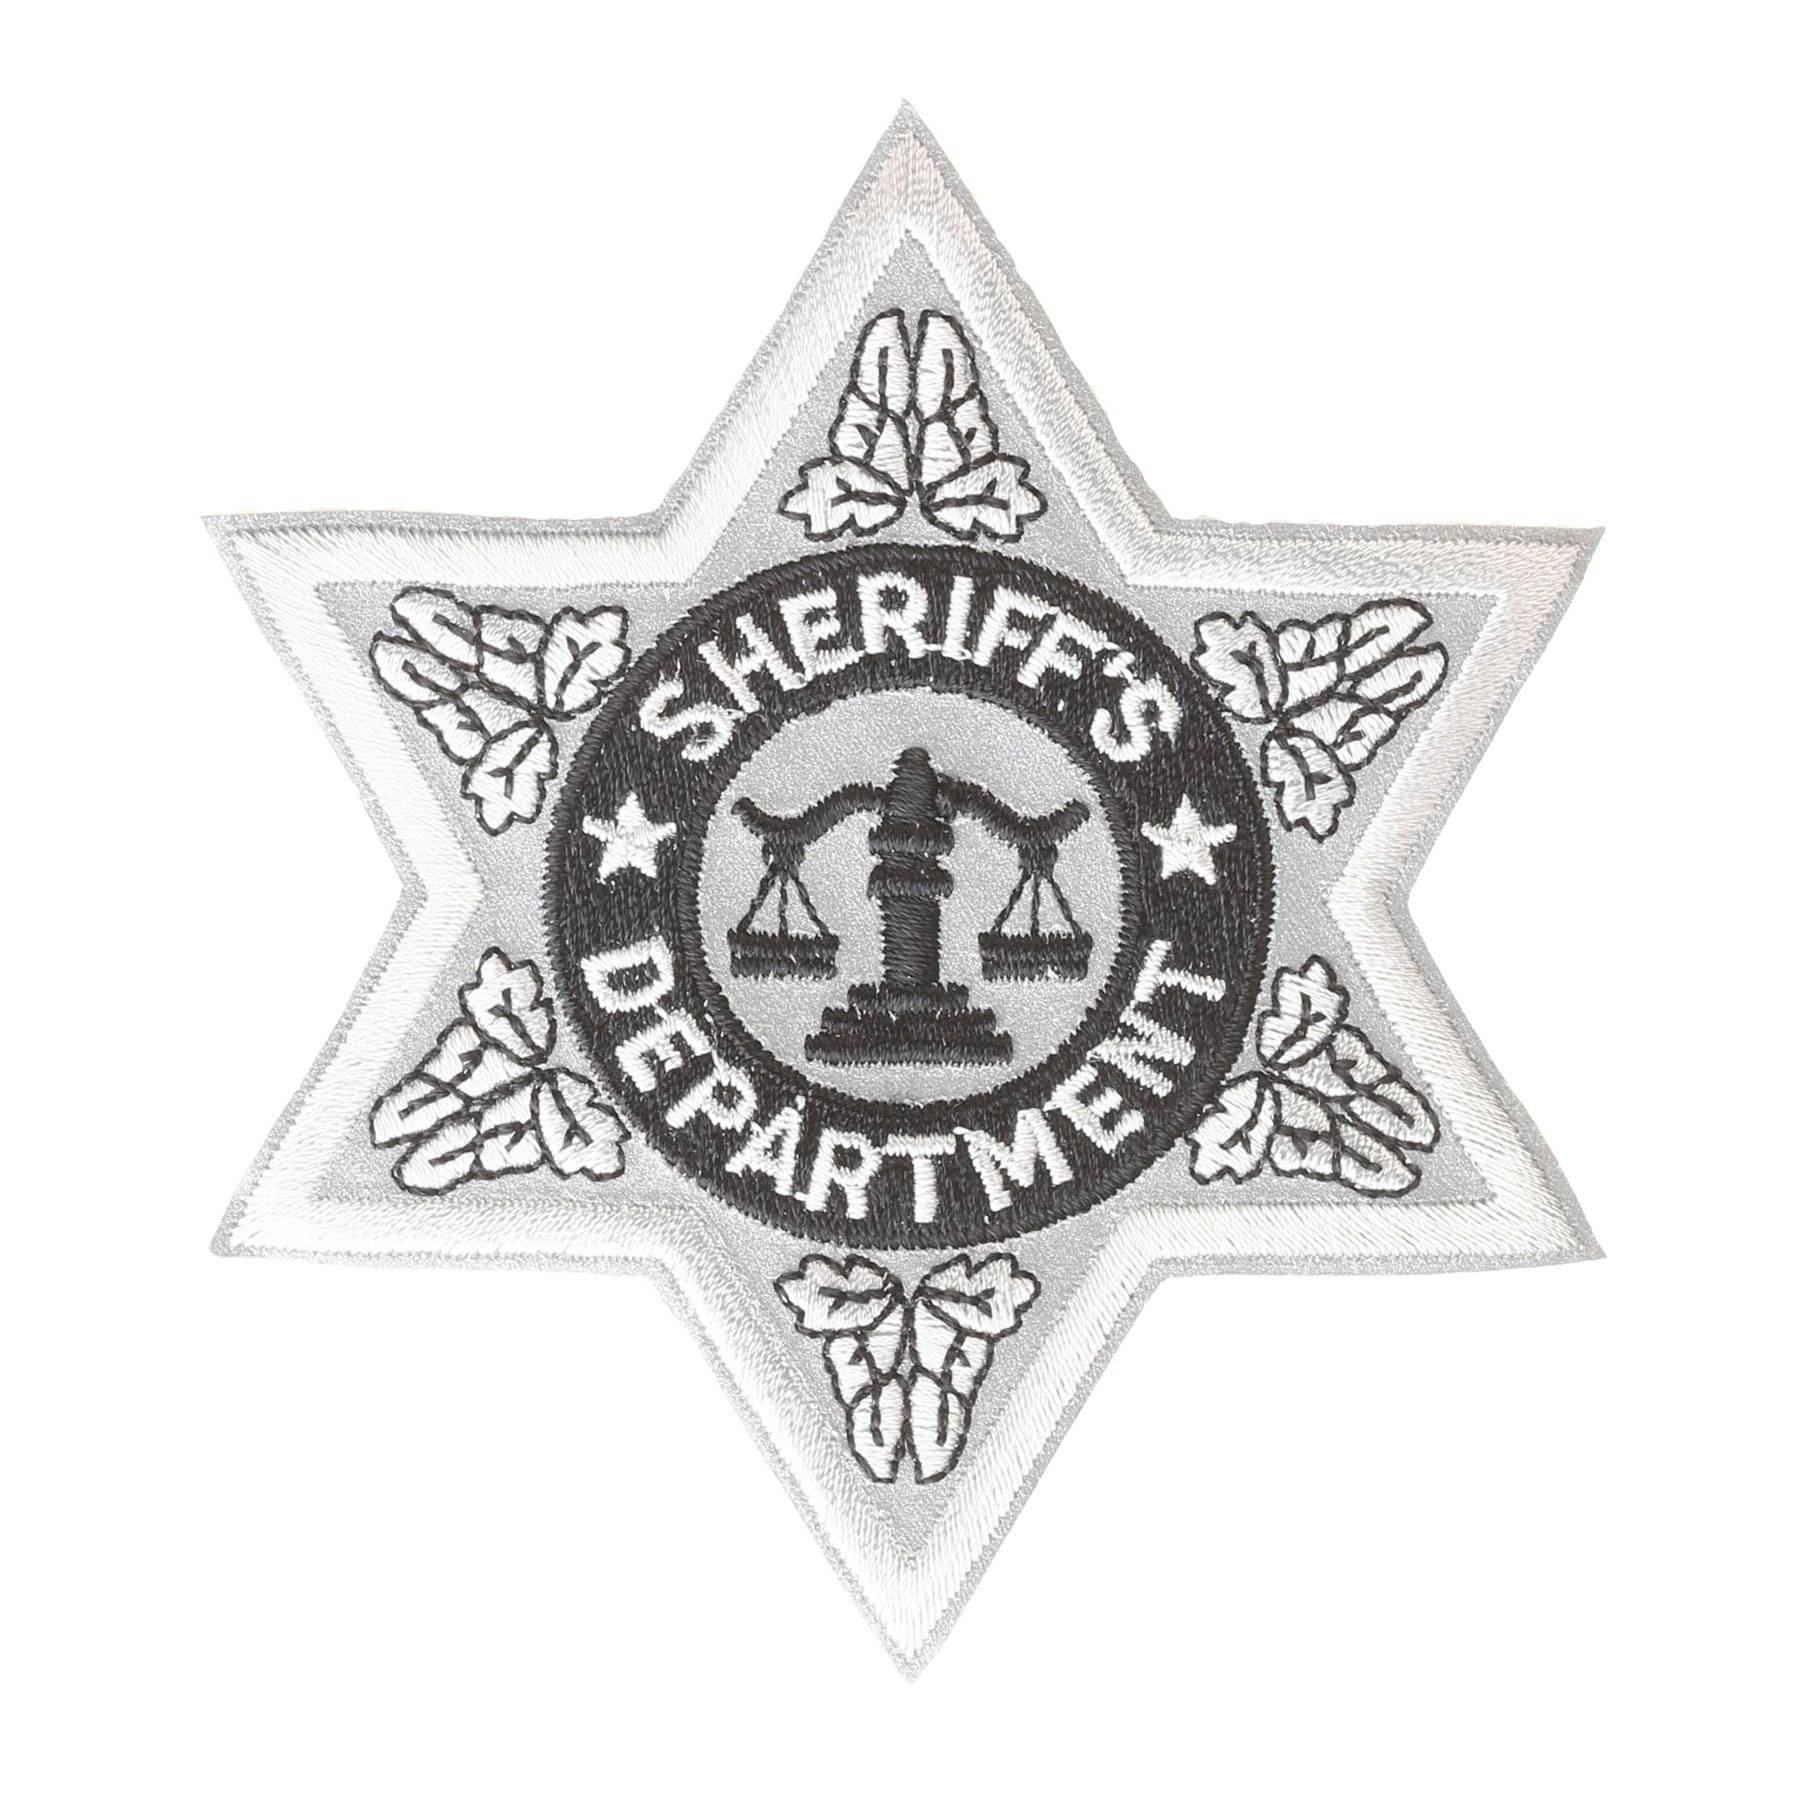 HERO'S PRIDE REFLECTIVE SHERIFF STAR CHEST PATCH